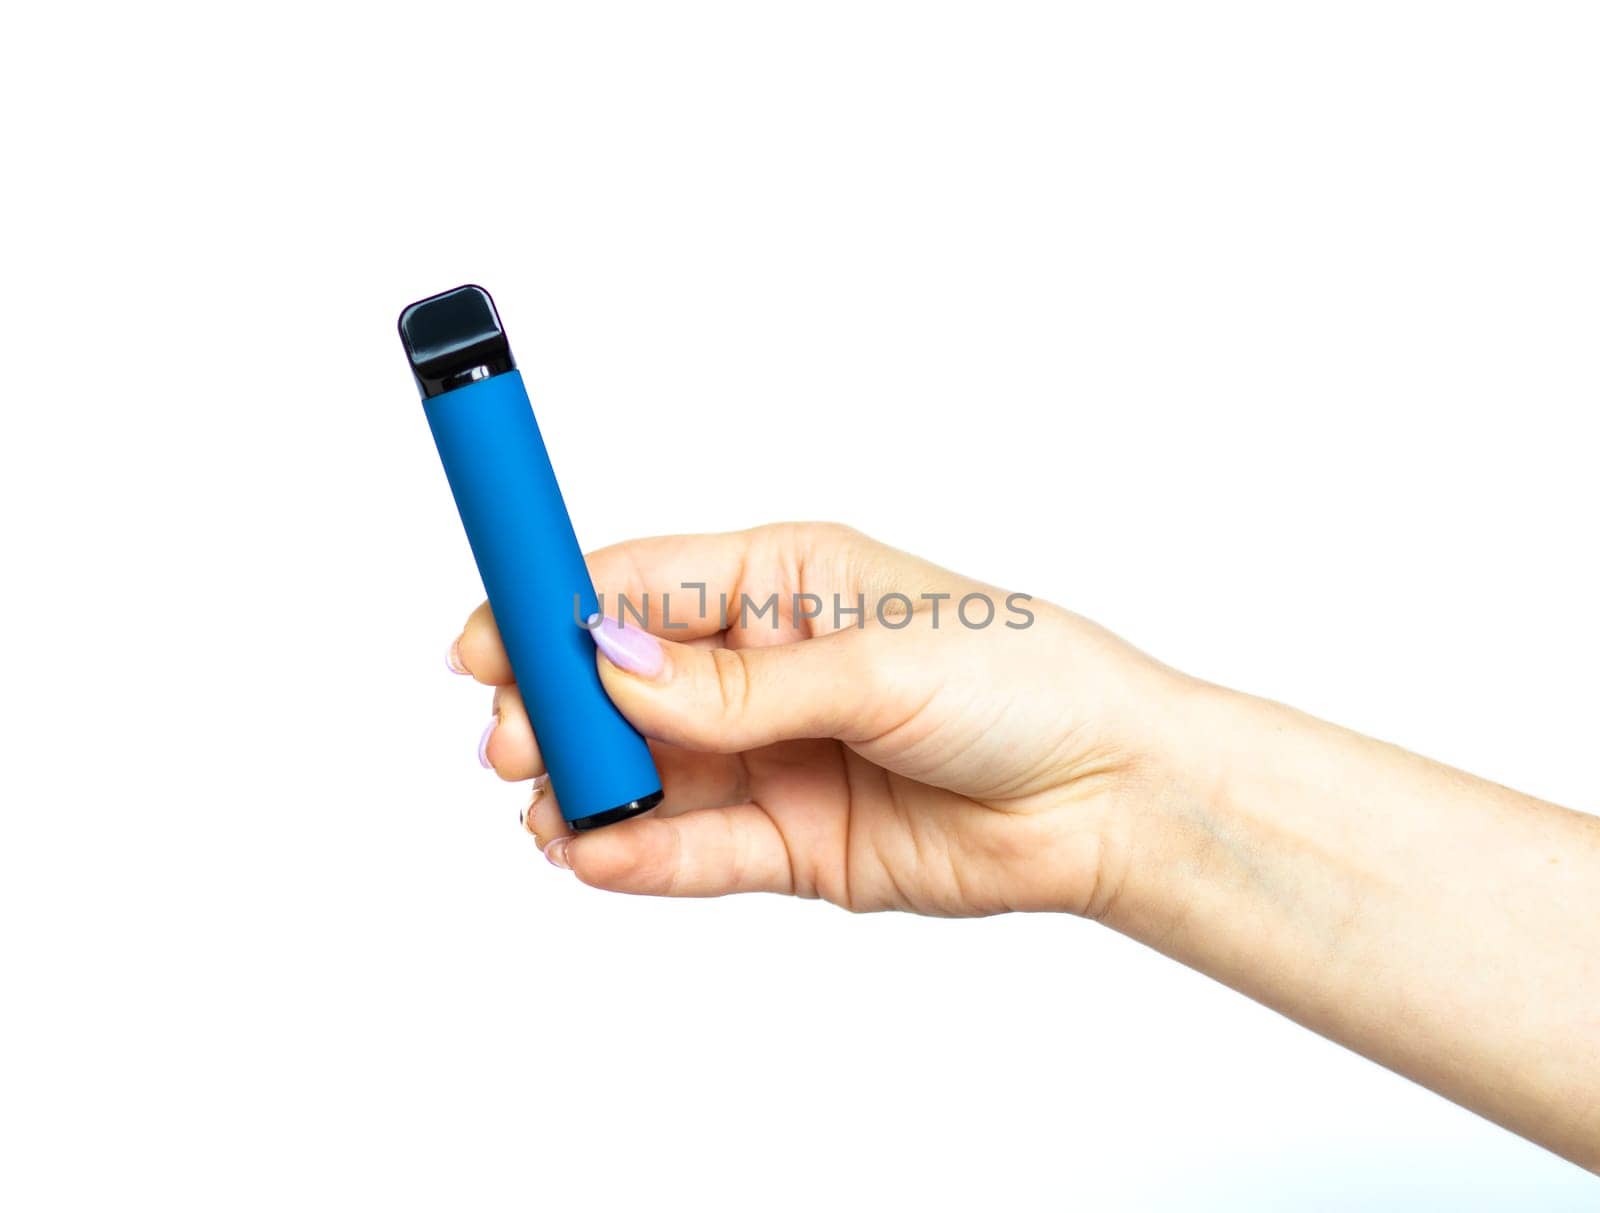 Disposable electronic cigarette. The concept of modern smoking, vaping, nicotine by Suietska